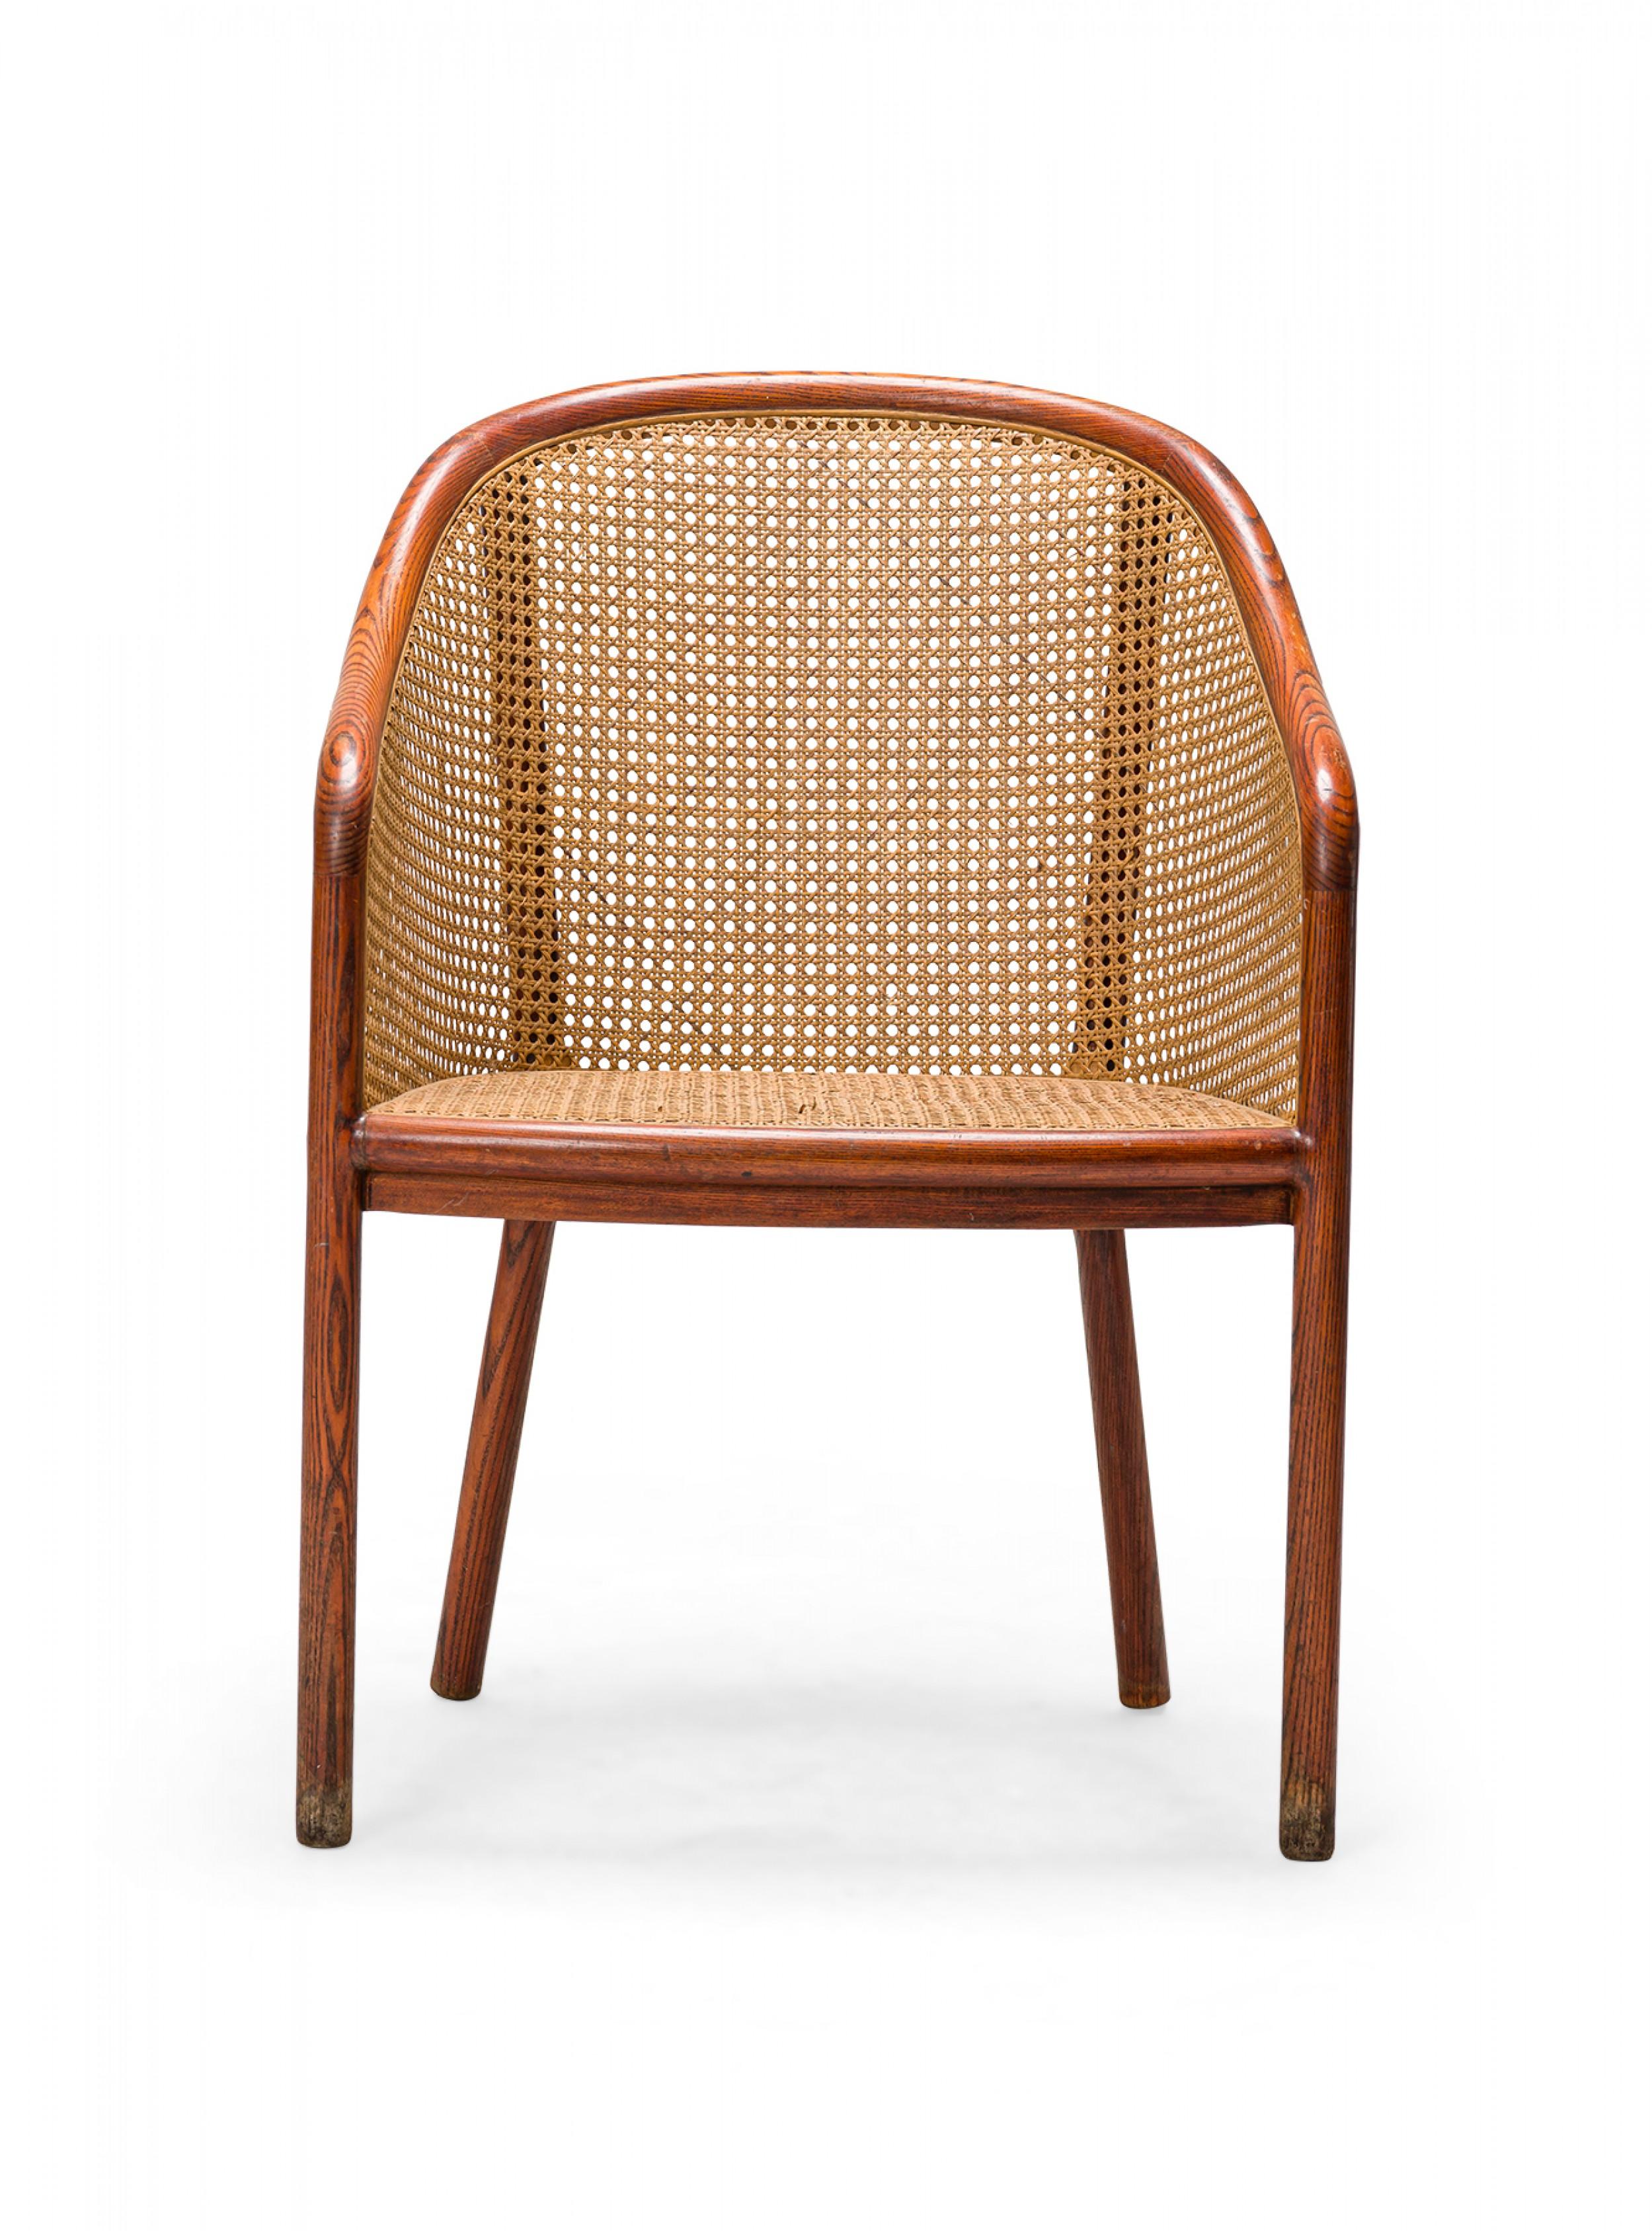 PAIR of American Mid-Century armchairs with steam bent ash wood frames and caned backs, sides, and seats, resting on four dowel legs. (WARD BENNETT)(PRICED AS PAIR).
 